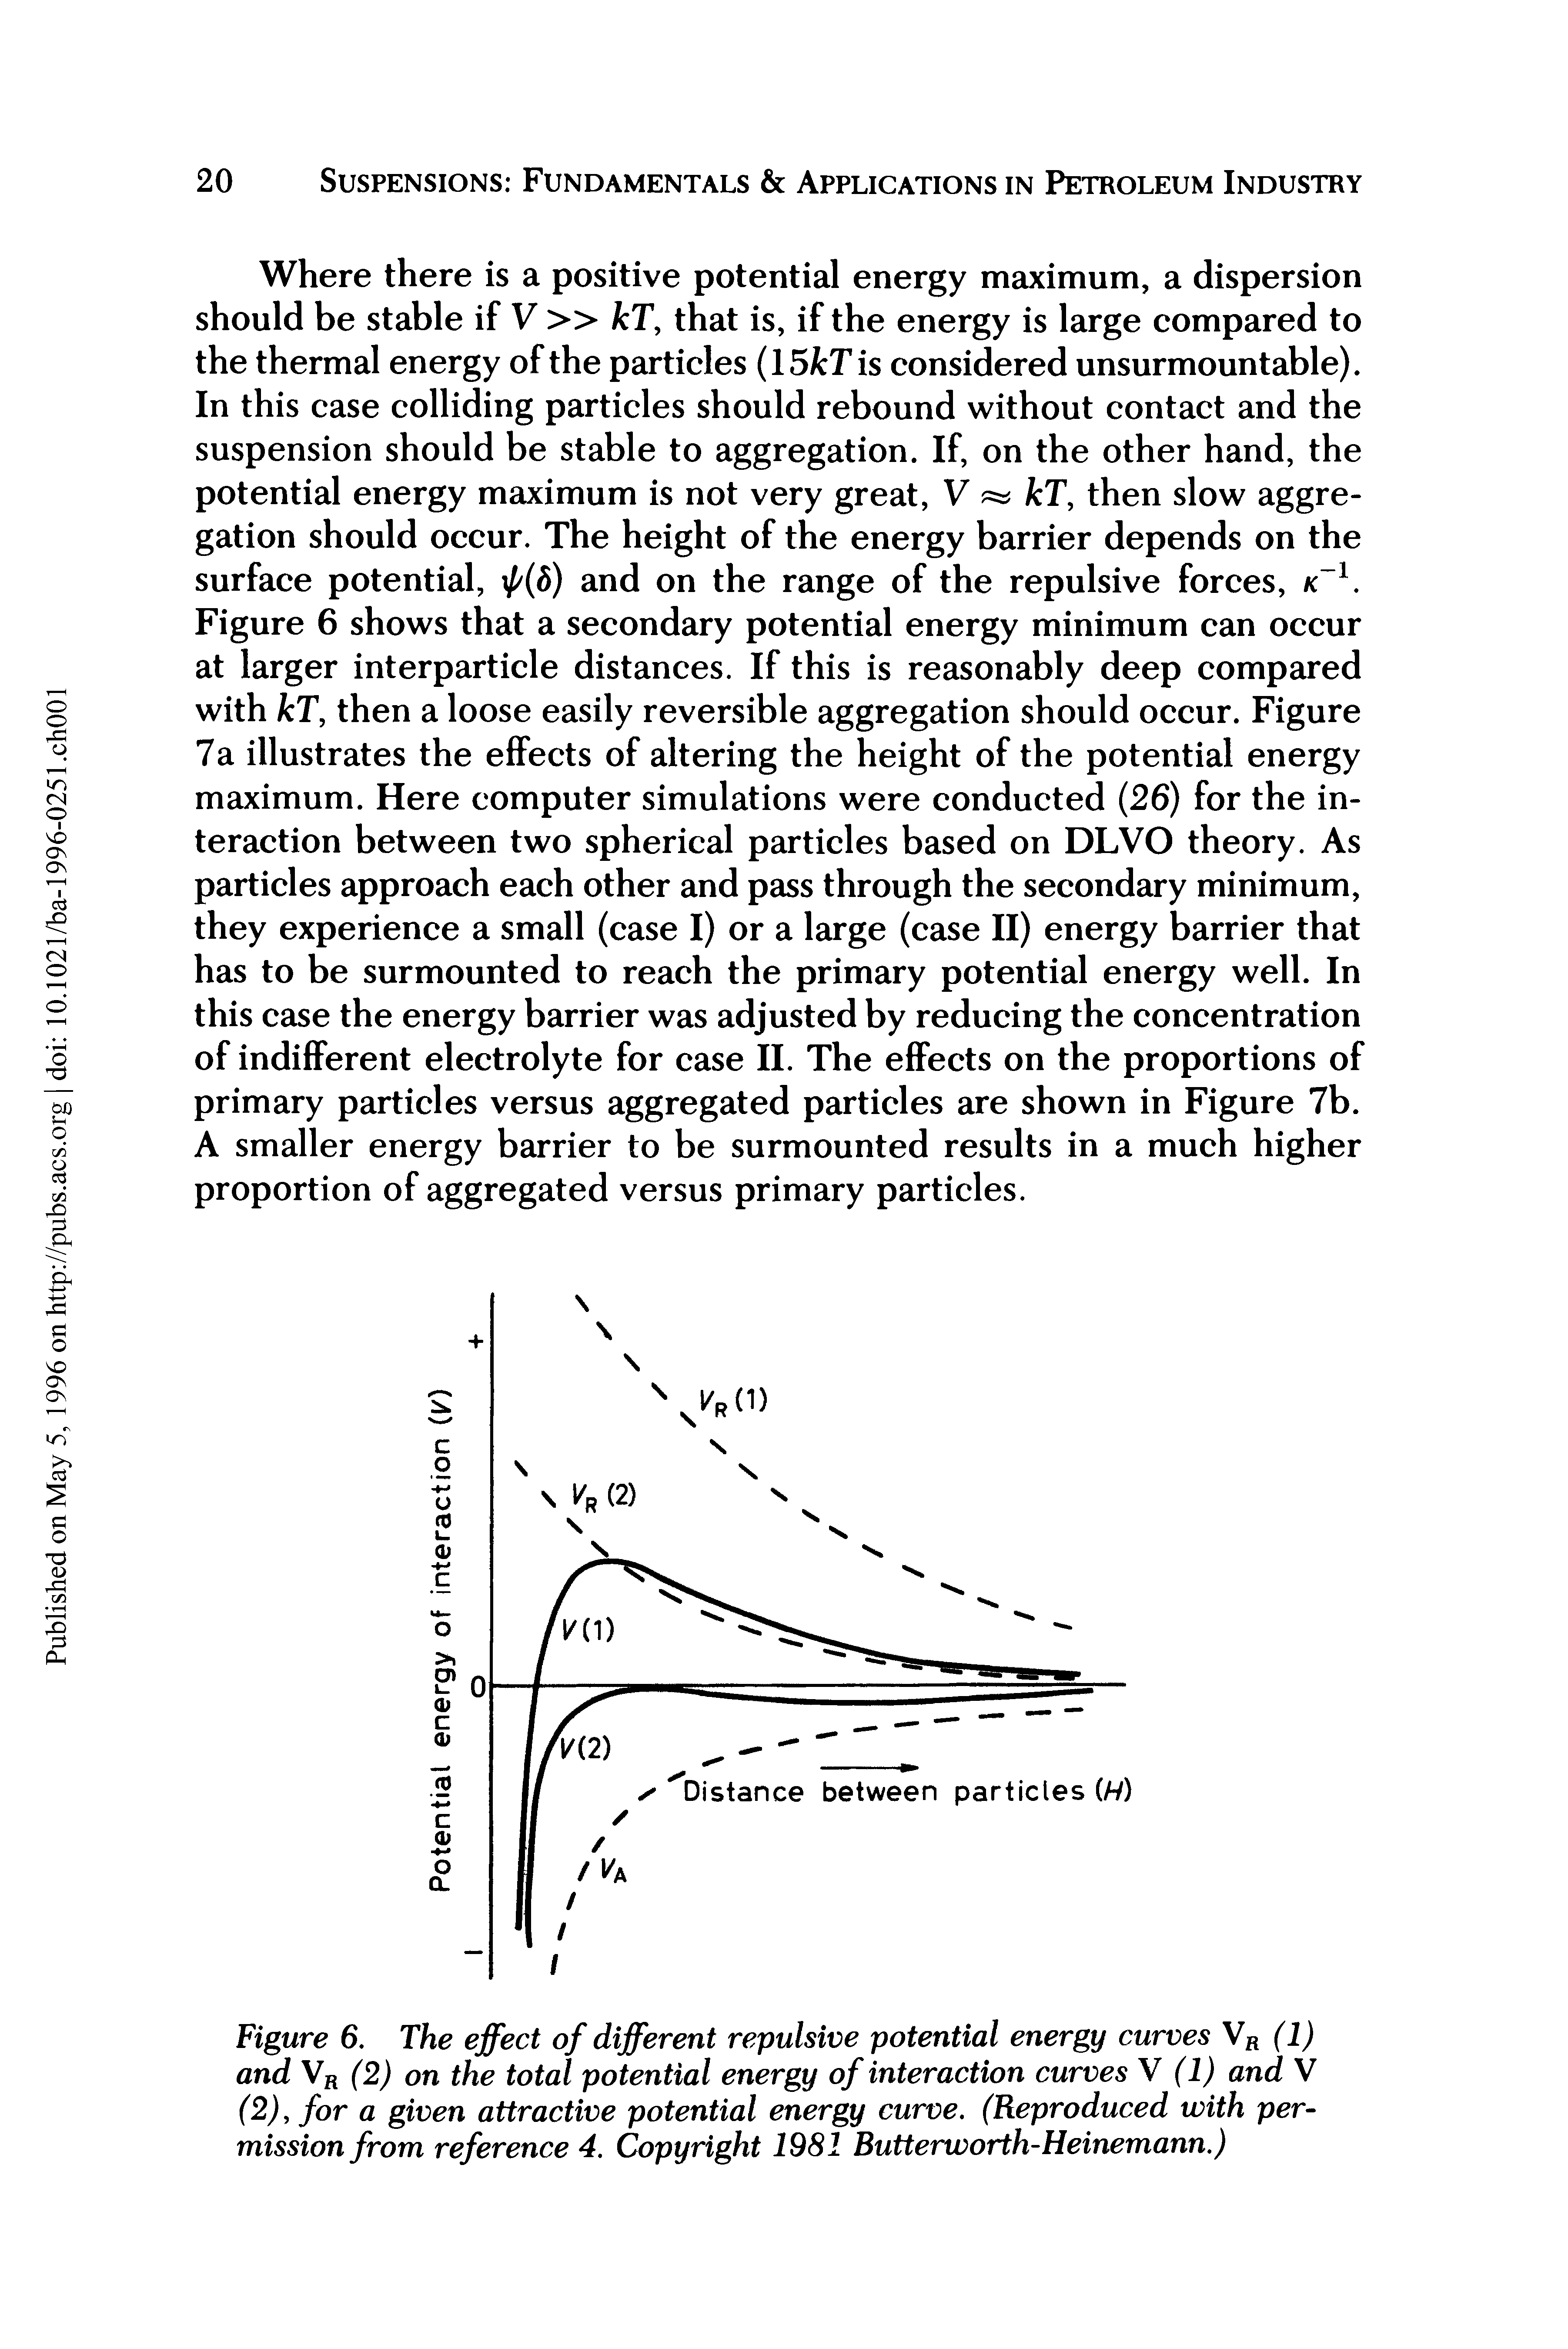 Figure 6. The effect of different repulsive potential energy curves VR (1) and VR (2) on the total potential energy of interaction curves V (I) and V (2), for a given attractive potential energy curve. (Reproduced with permission from reference 4. Copyright 1981 Butterworth-Heinemann.)...